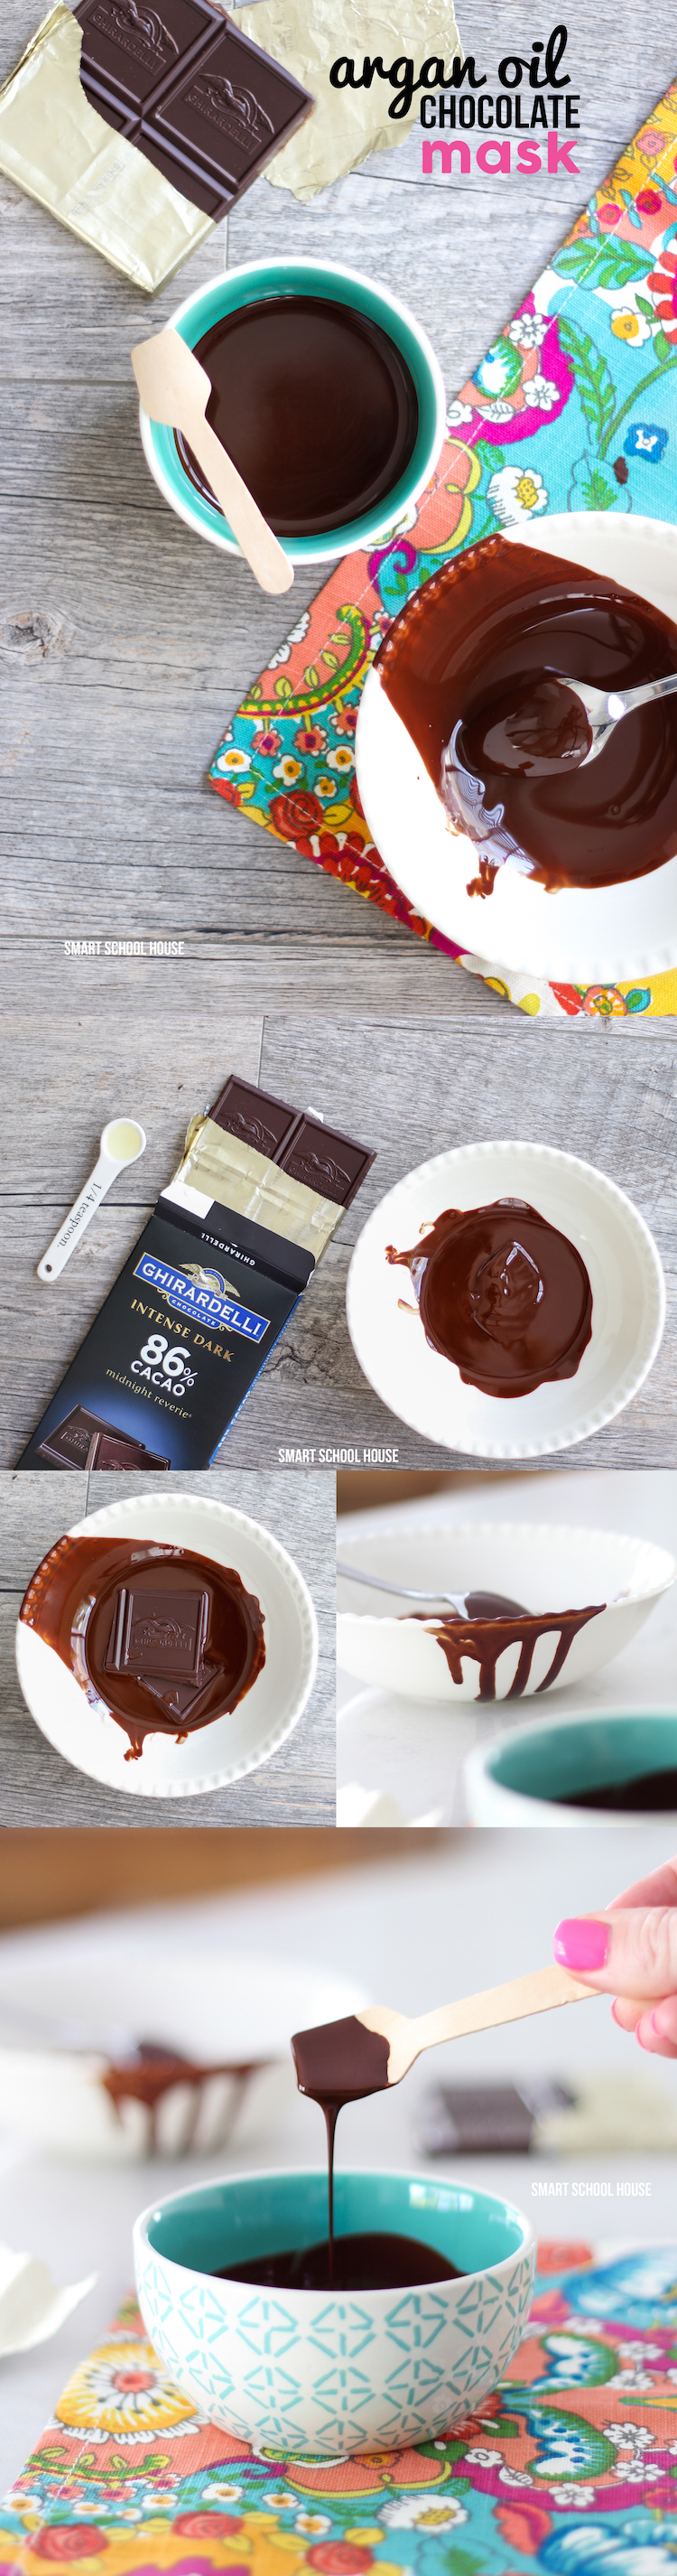 DIY Argan Oil Chocolate Mask - instant smoothing and nourishing results!